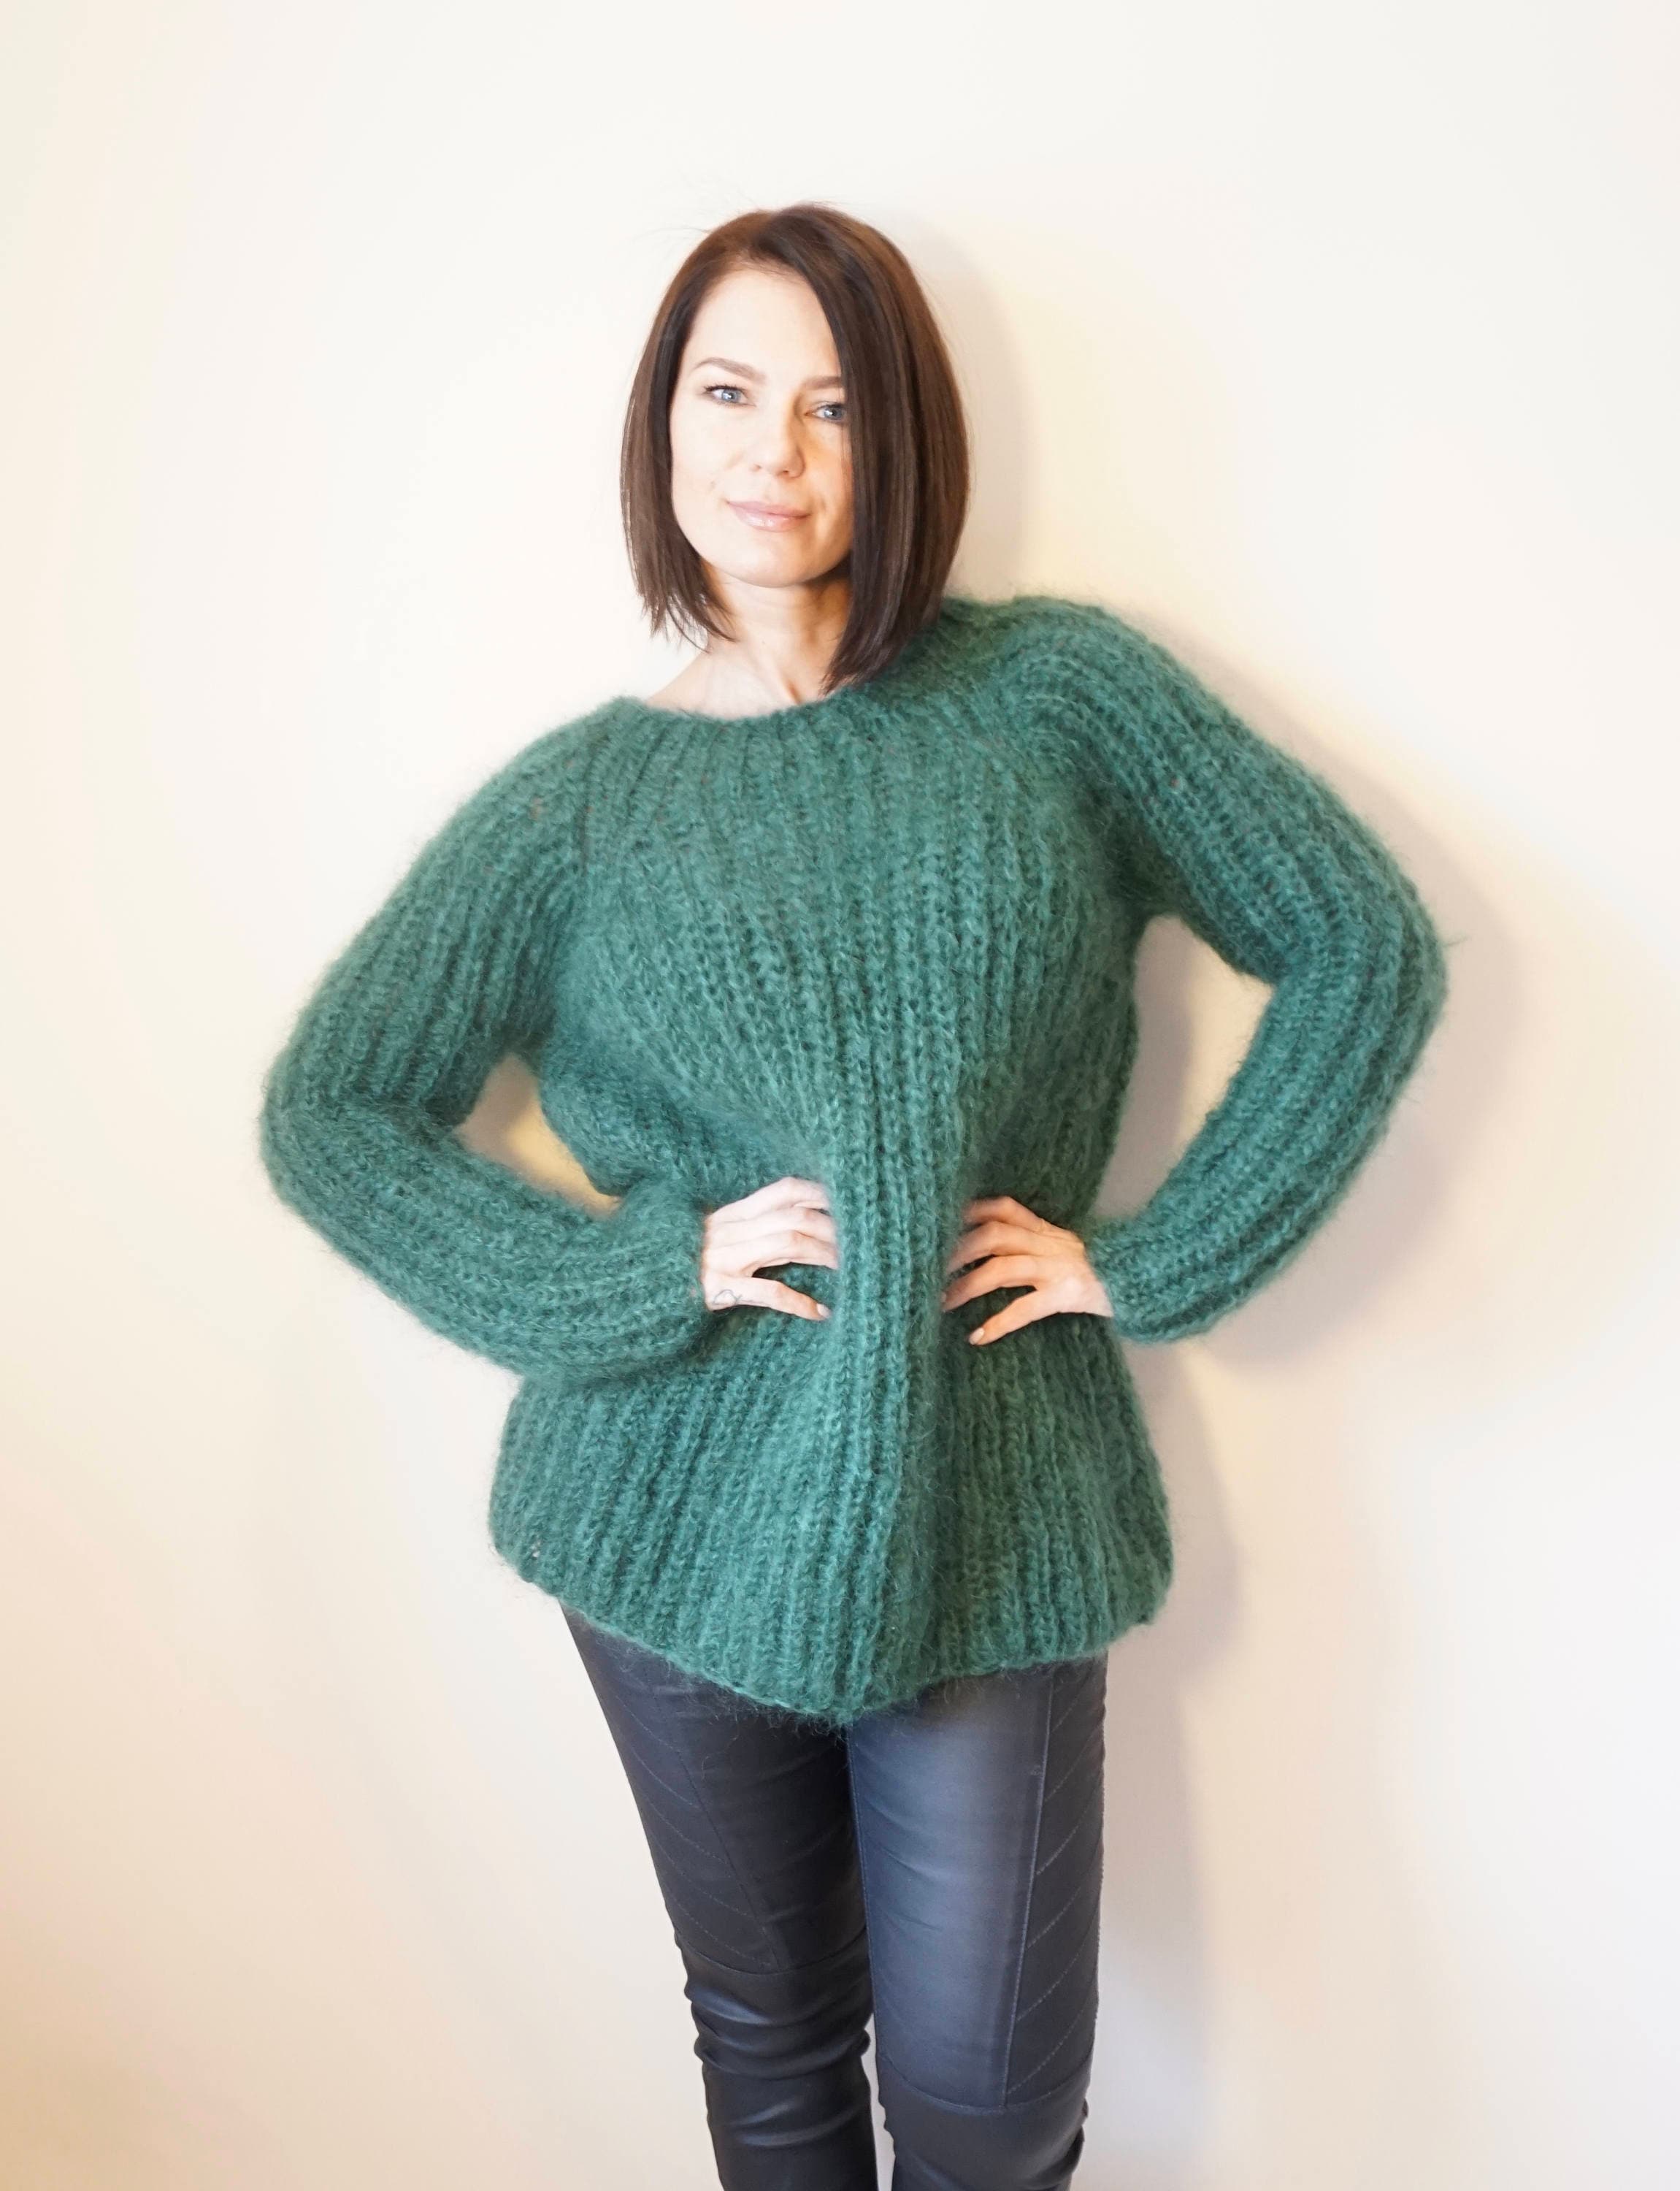 Emerald Green Mohair Hand Knitted Women Sweater Exclusieve Etsy